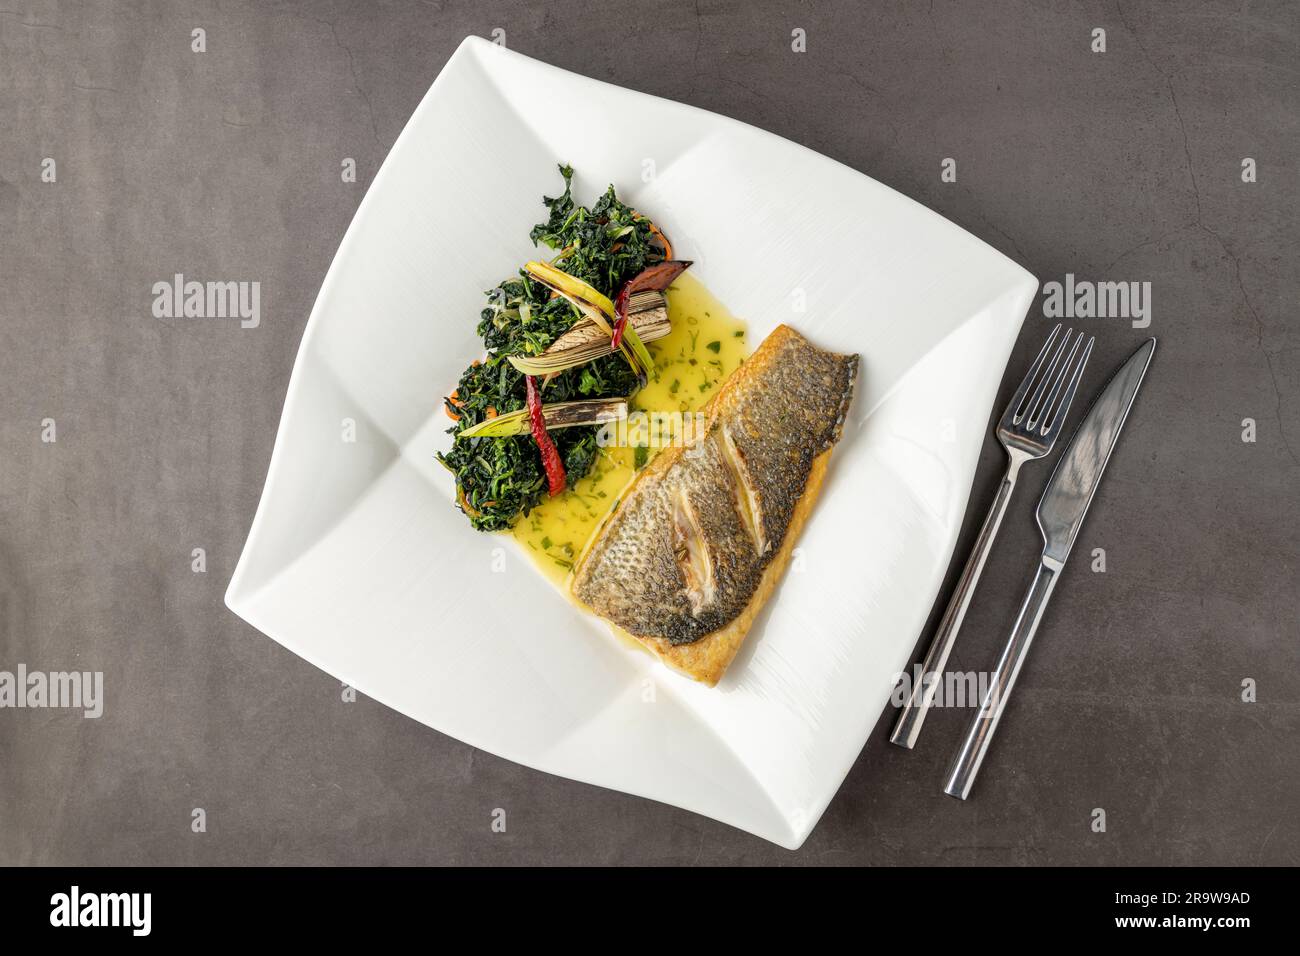 Grilled sea bass fillet served with garnishes in a fine dining restaurant Stock Photo